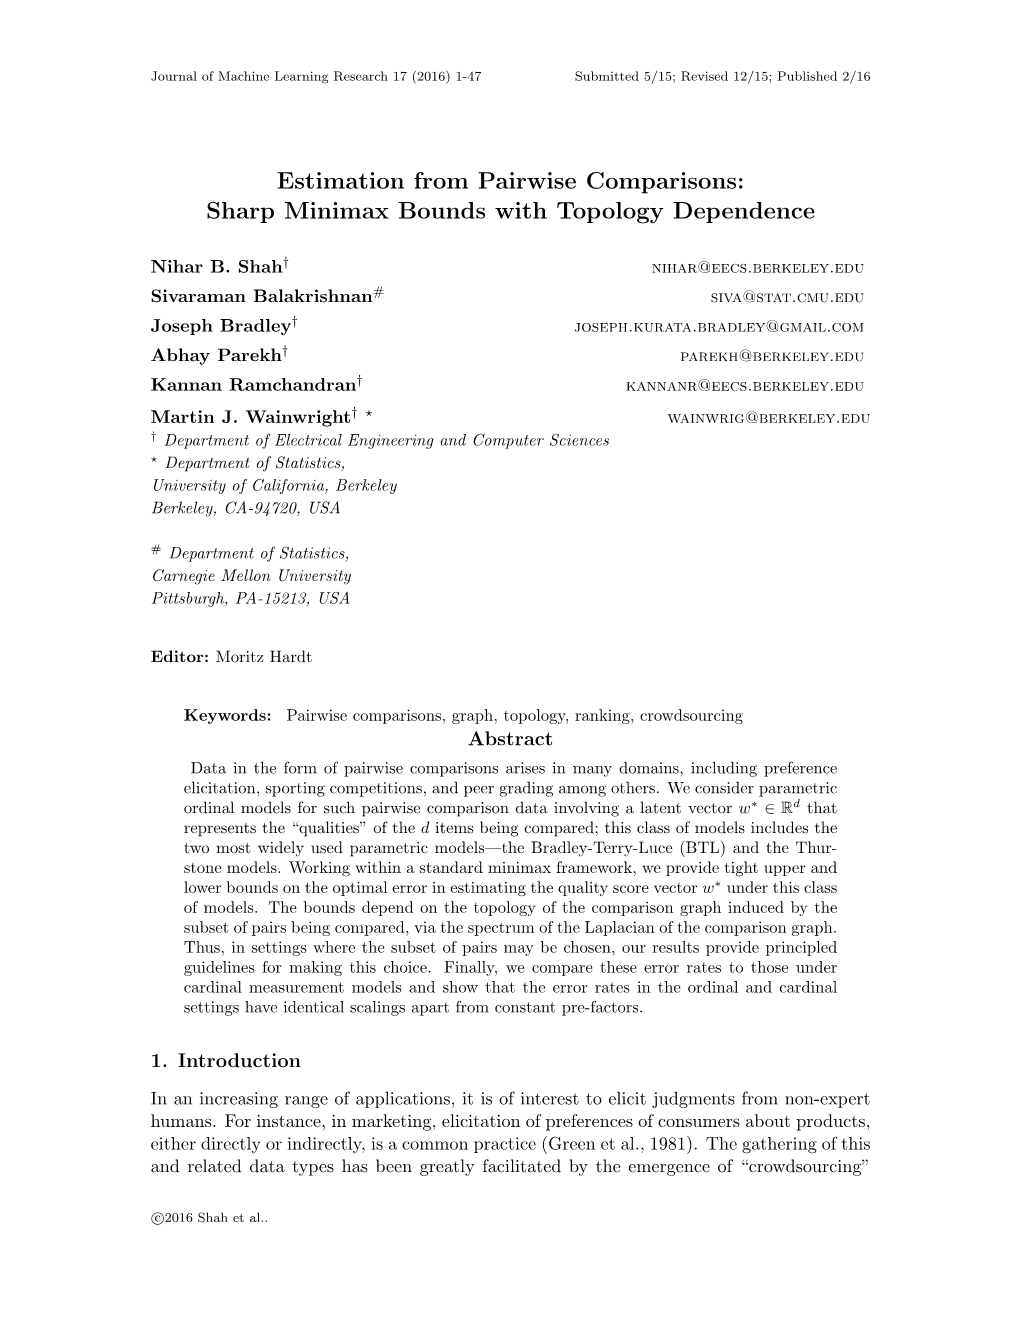 Estimation from Pairwise Comparisons: Sharp Minimax Bounds with Topology Dependence